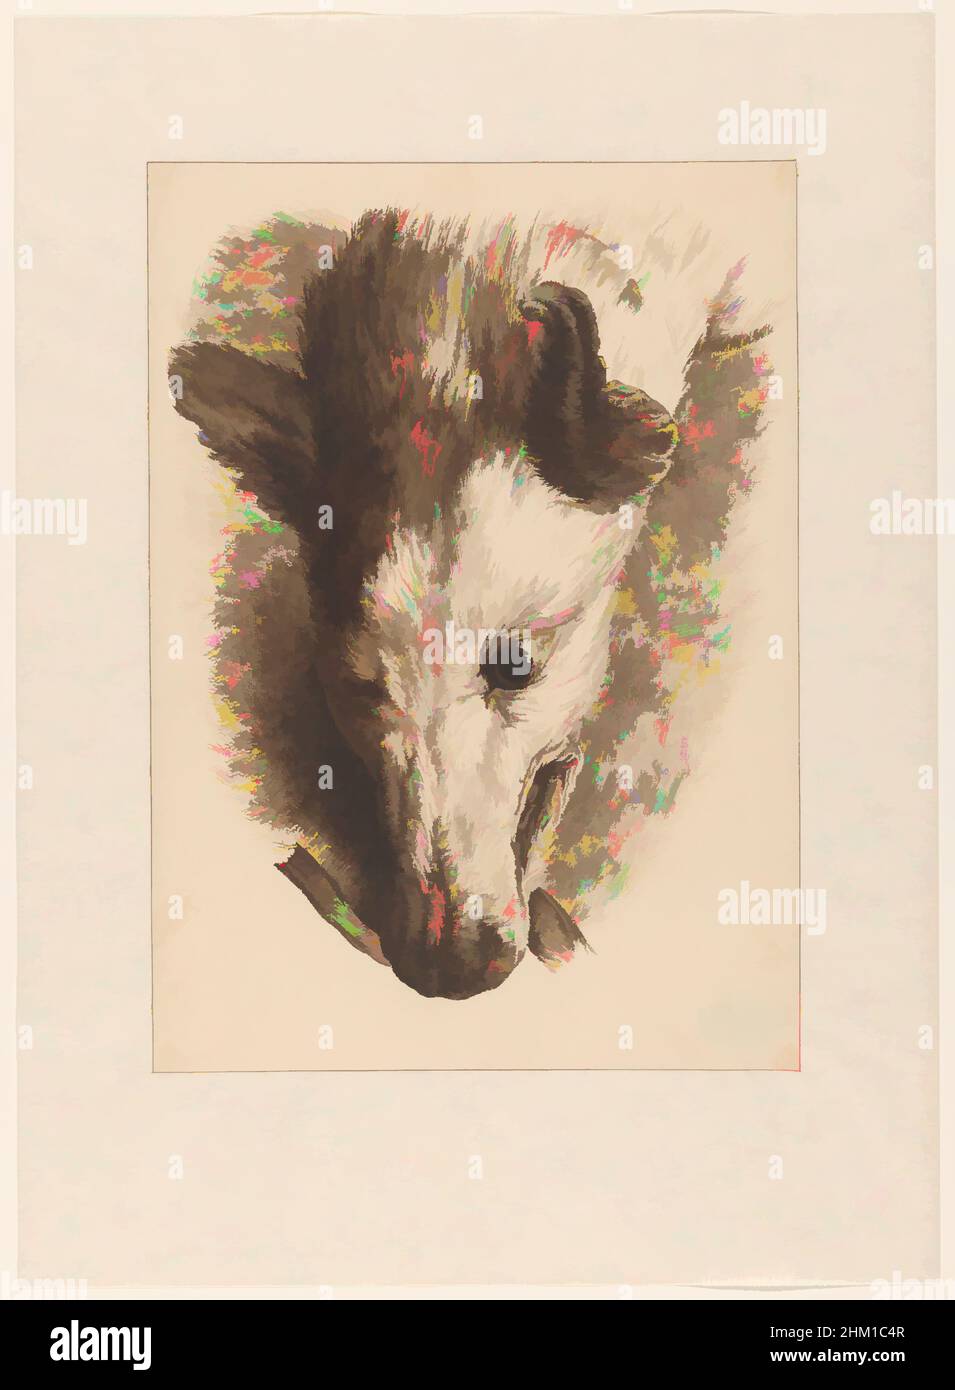 Art inspired by Head of a fox, draughtsman: Joseph Mendes da Costa (1806-1893), Jean Augustin Daiwaille, 23-Dec-1830, paper, ink, pen, height 380 mm × width 272 mm, Classic works modernized by Artotop with a splash of modernity. Shapes, color and value, eye-catching visual impact on art. Emotions through freedom of artworks in a contemporary way. A timeless message pursuing a wildly creative new direction. Artists turning to the digital medium and creating the Artotop NFT Stock Photo